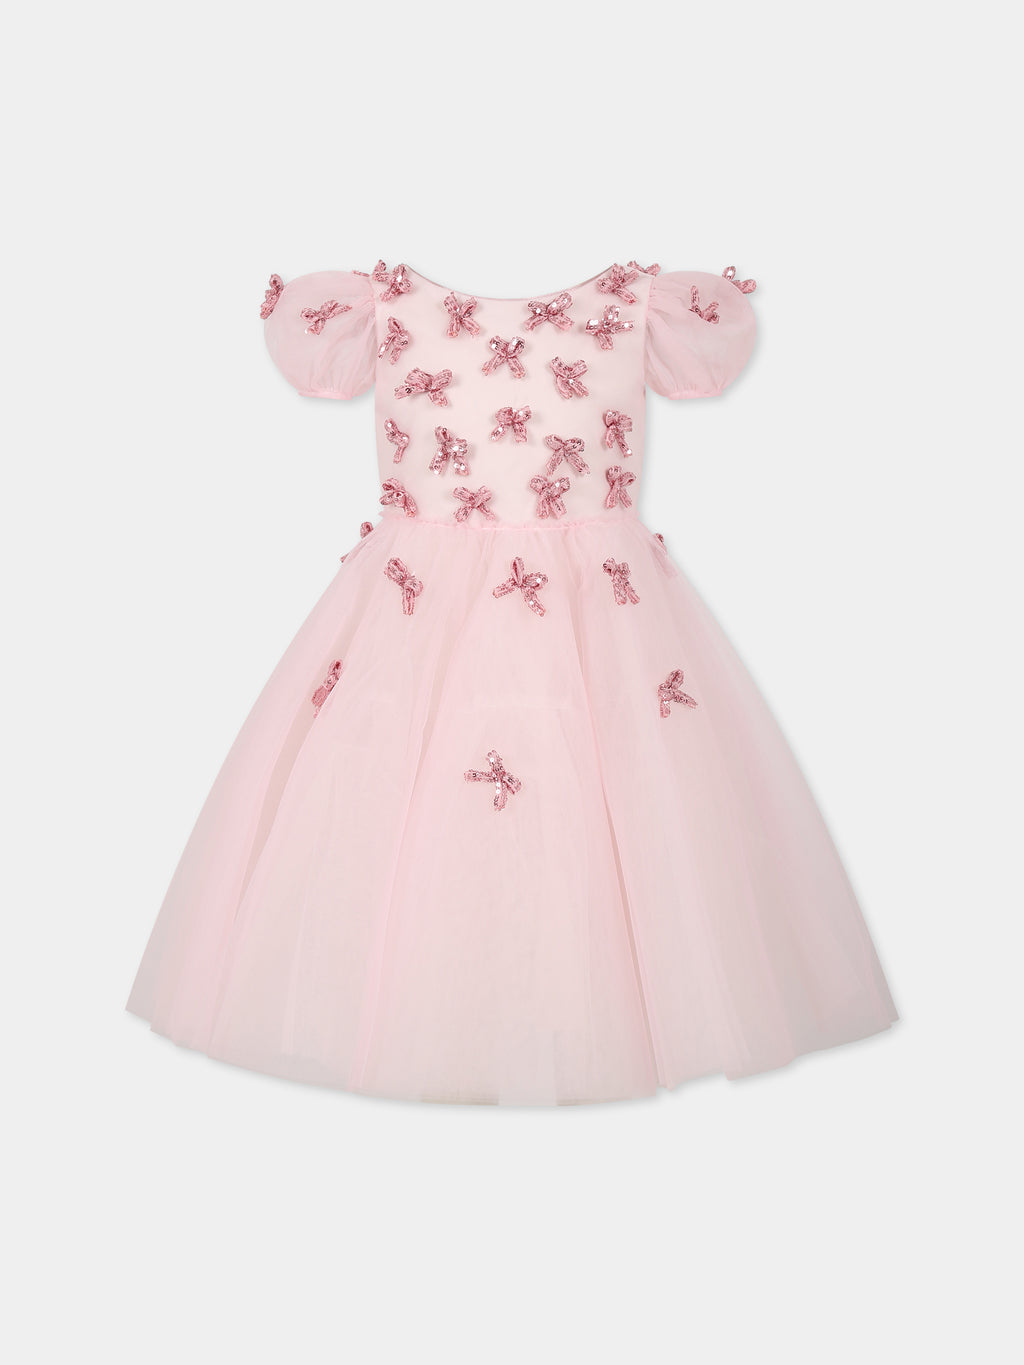 Pink dress for girl with bows